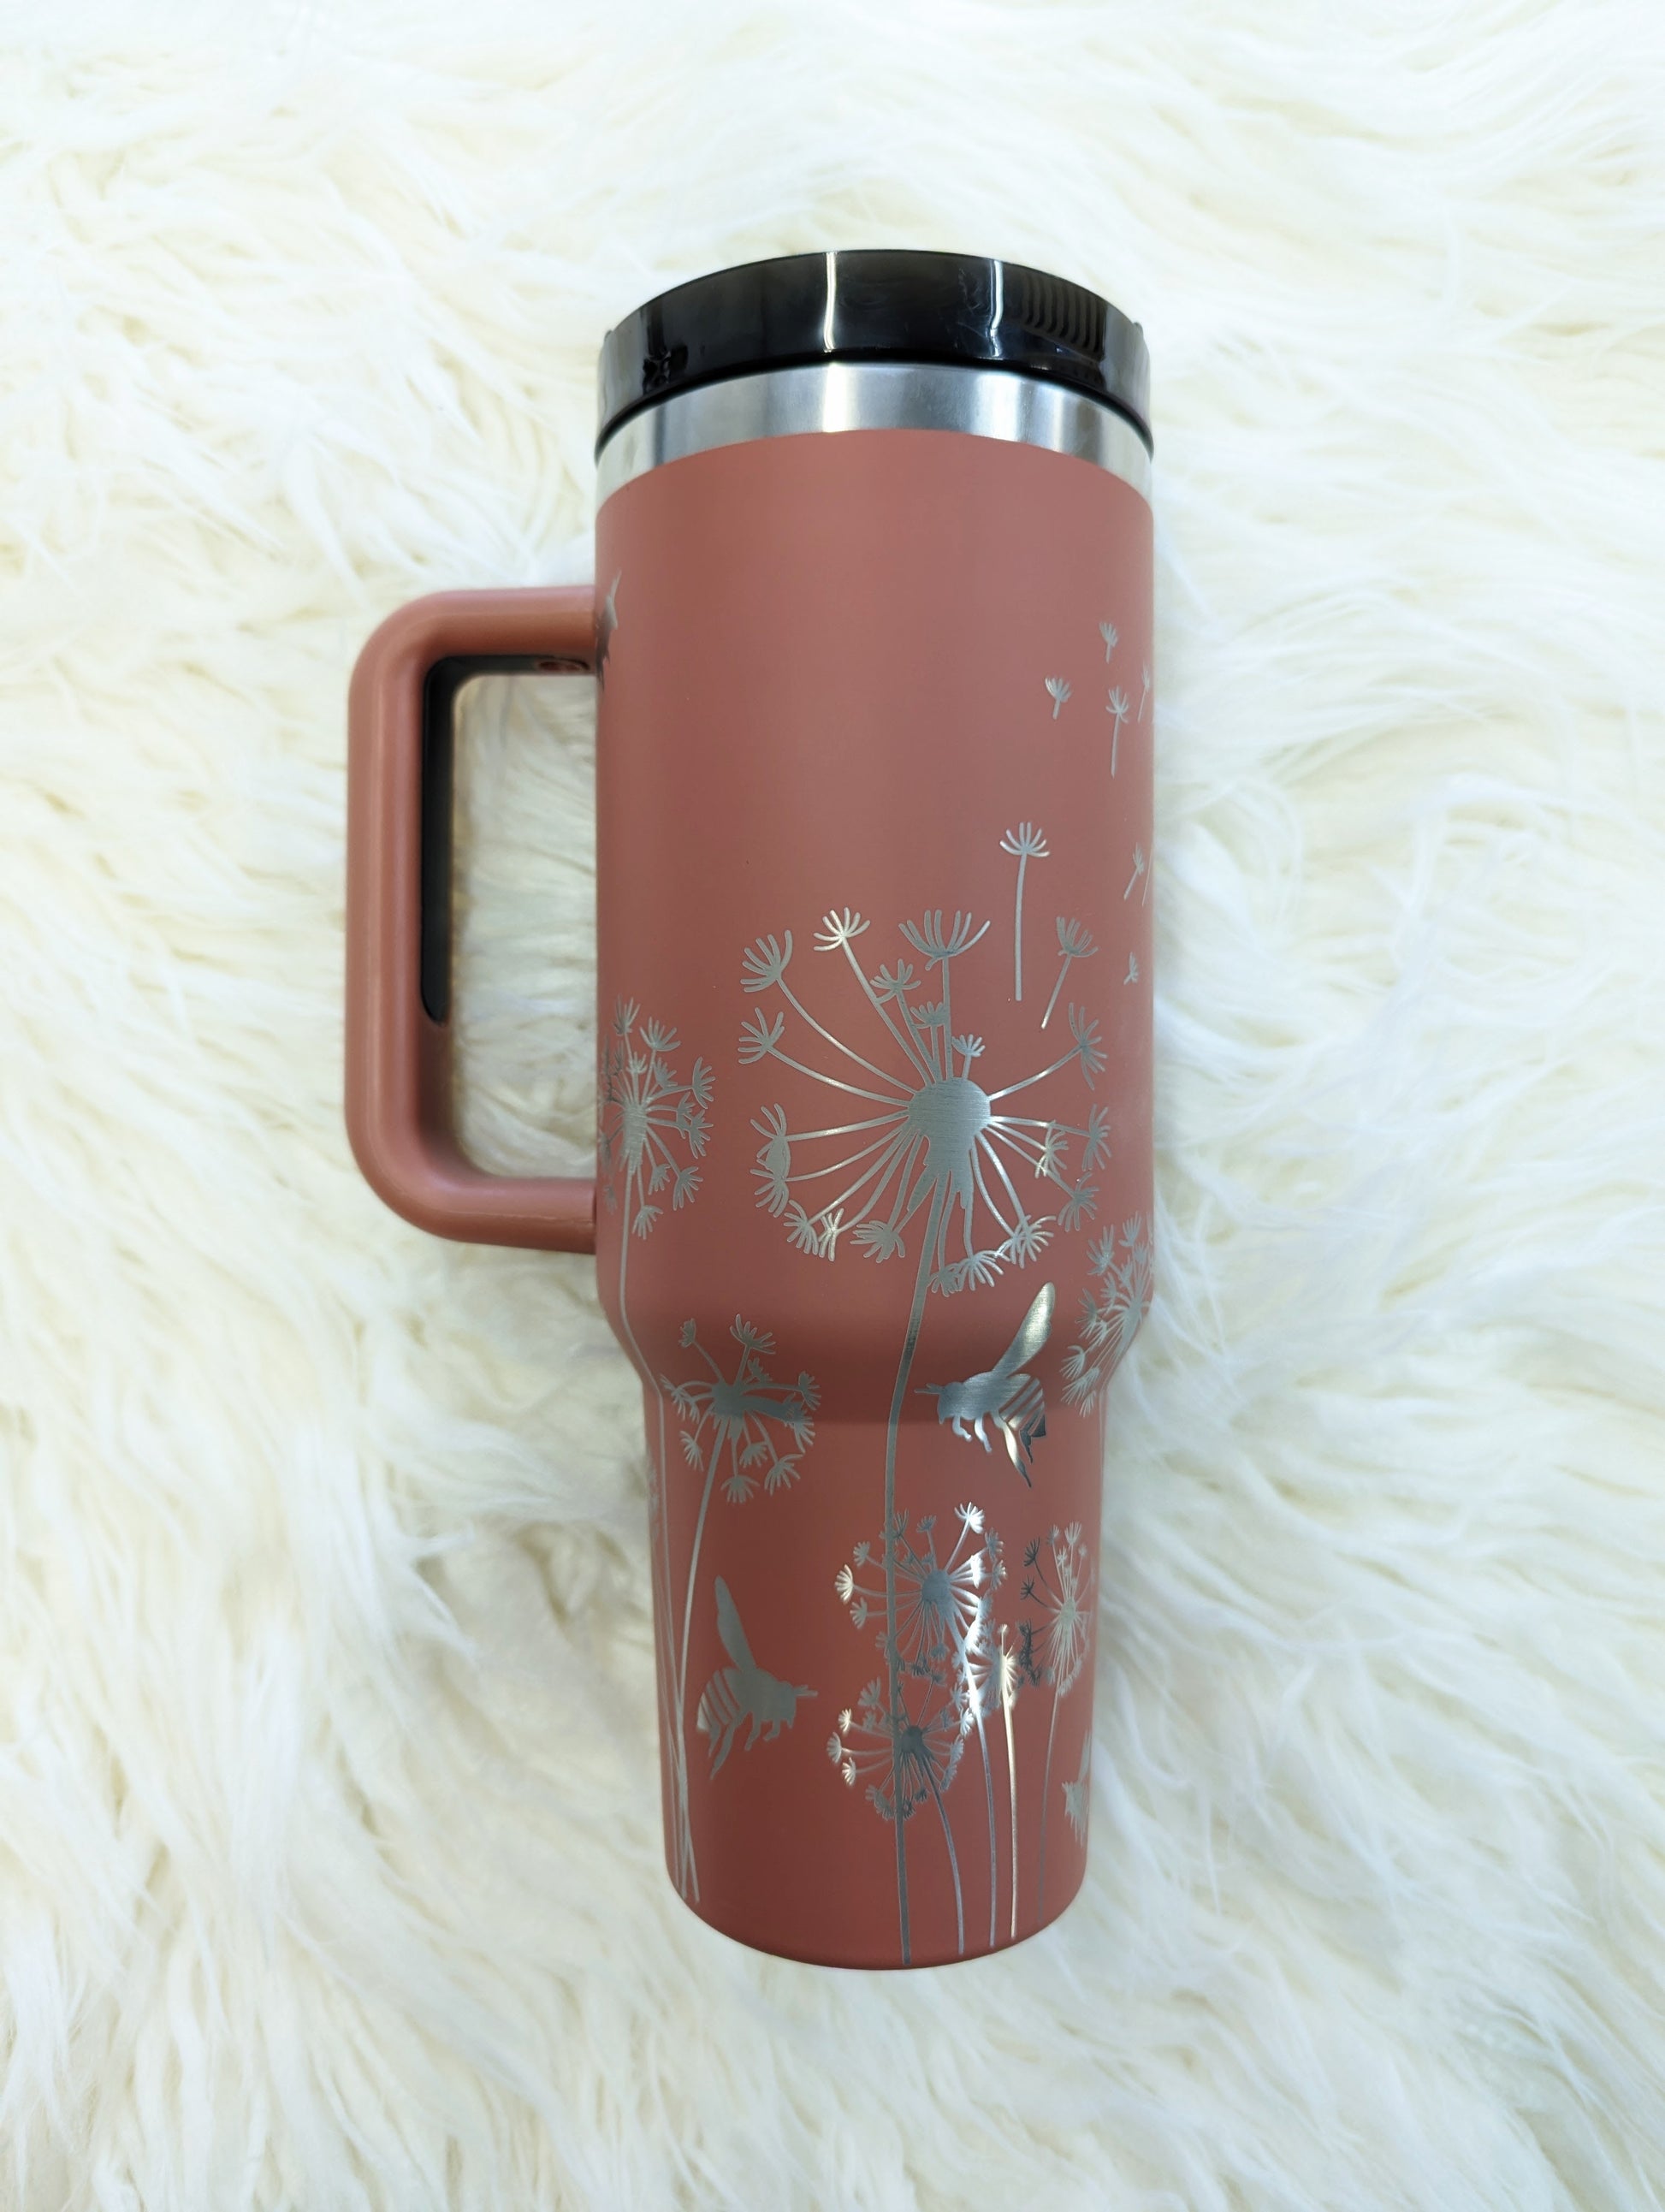 Dandelion and Bumblebee Pattern engraved 40 oz insulated stainless steel tumbler